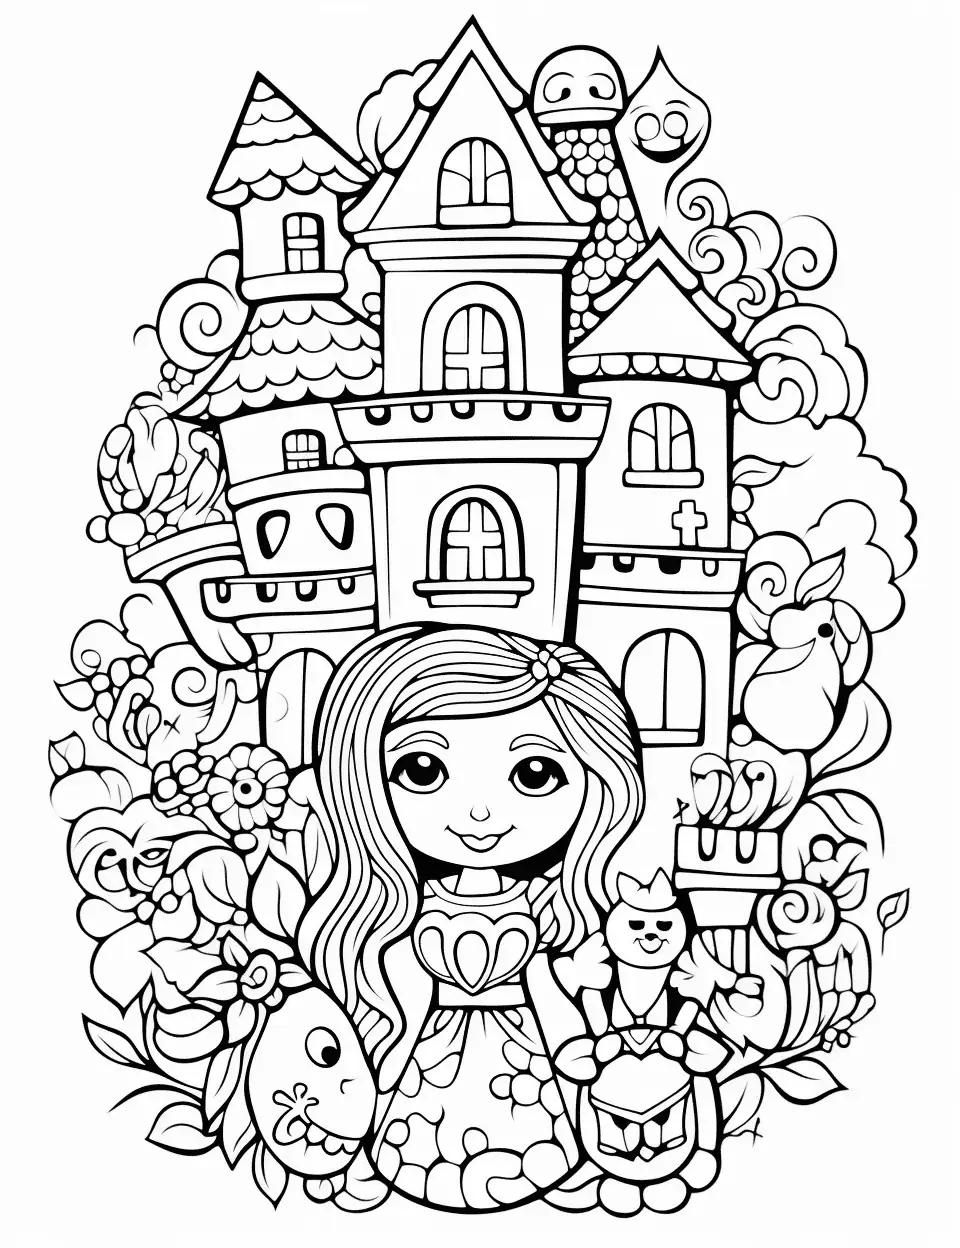 Kawaii Fairy Tale Adult Coloring Page - Cute, kawaii-style characters in a fairy tale, surrounded by tiny castles and characters.